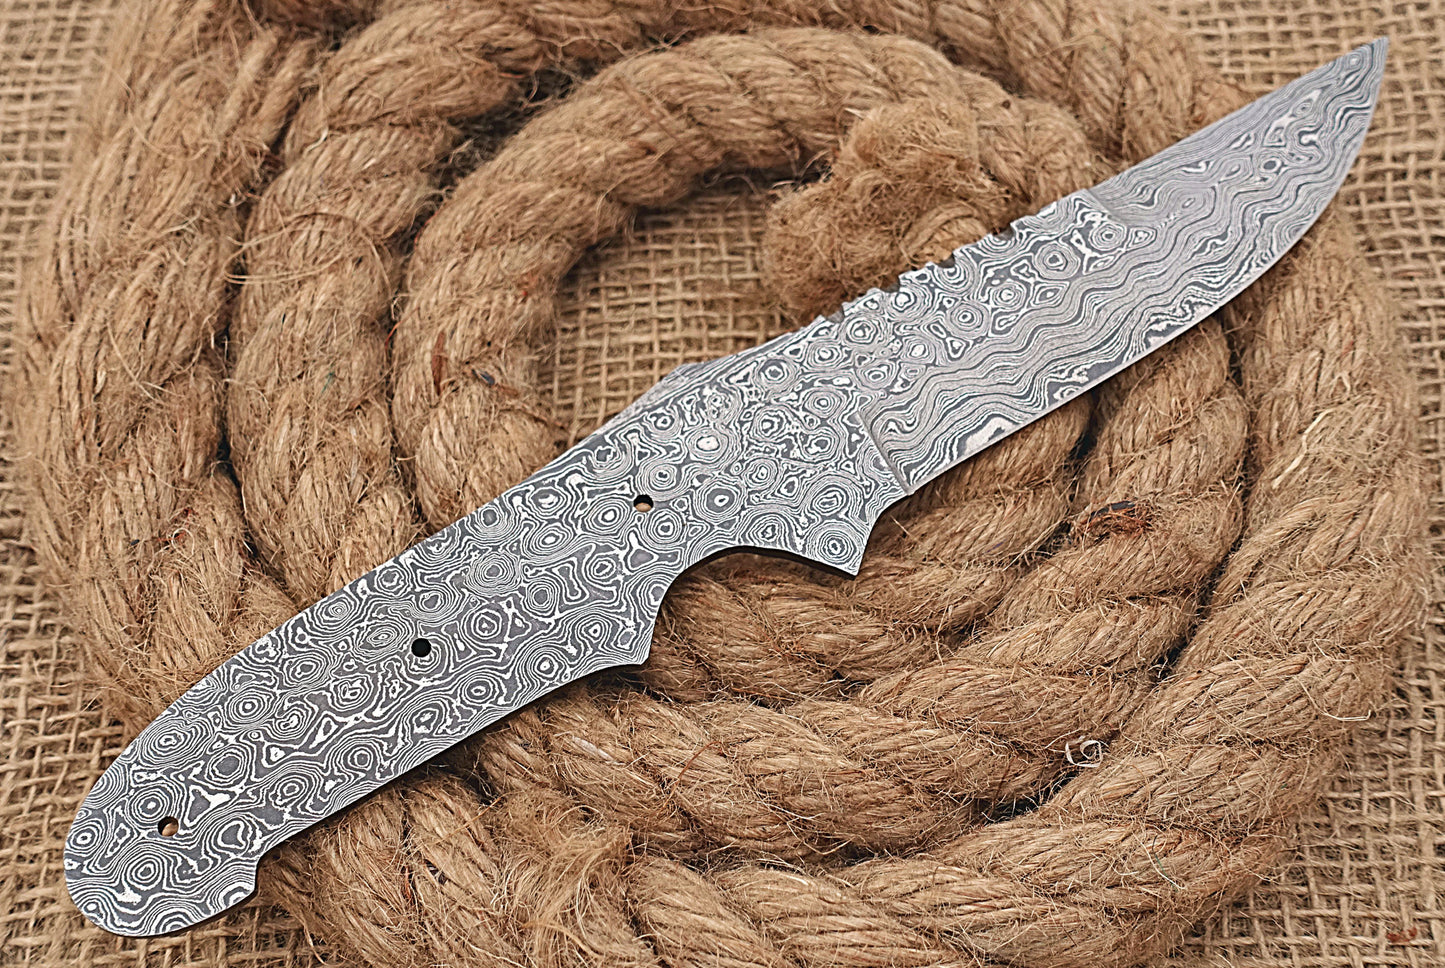 Knife Making, Damascus Steel Blank Blade 9.25 inches Long Hand Forged Trailing Point Skinning Knife Blade, Hunting Knife, 4.25 inches Cutting Edge, 4.5" Scale Space with 3 Pin Hole